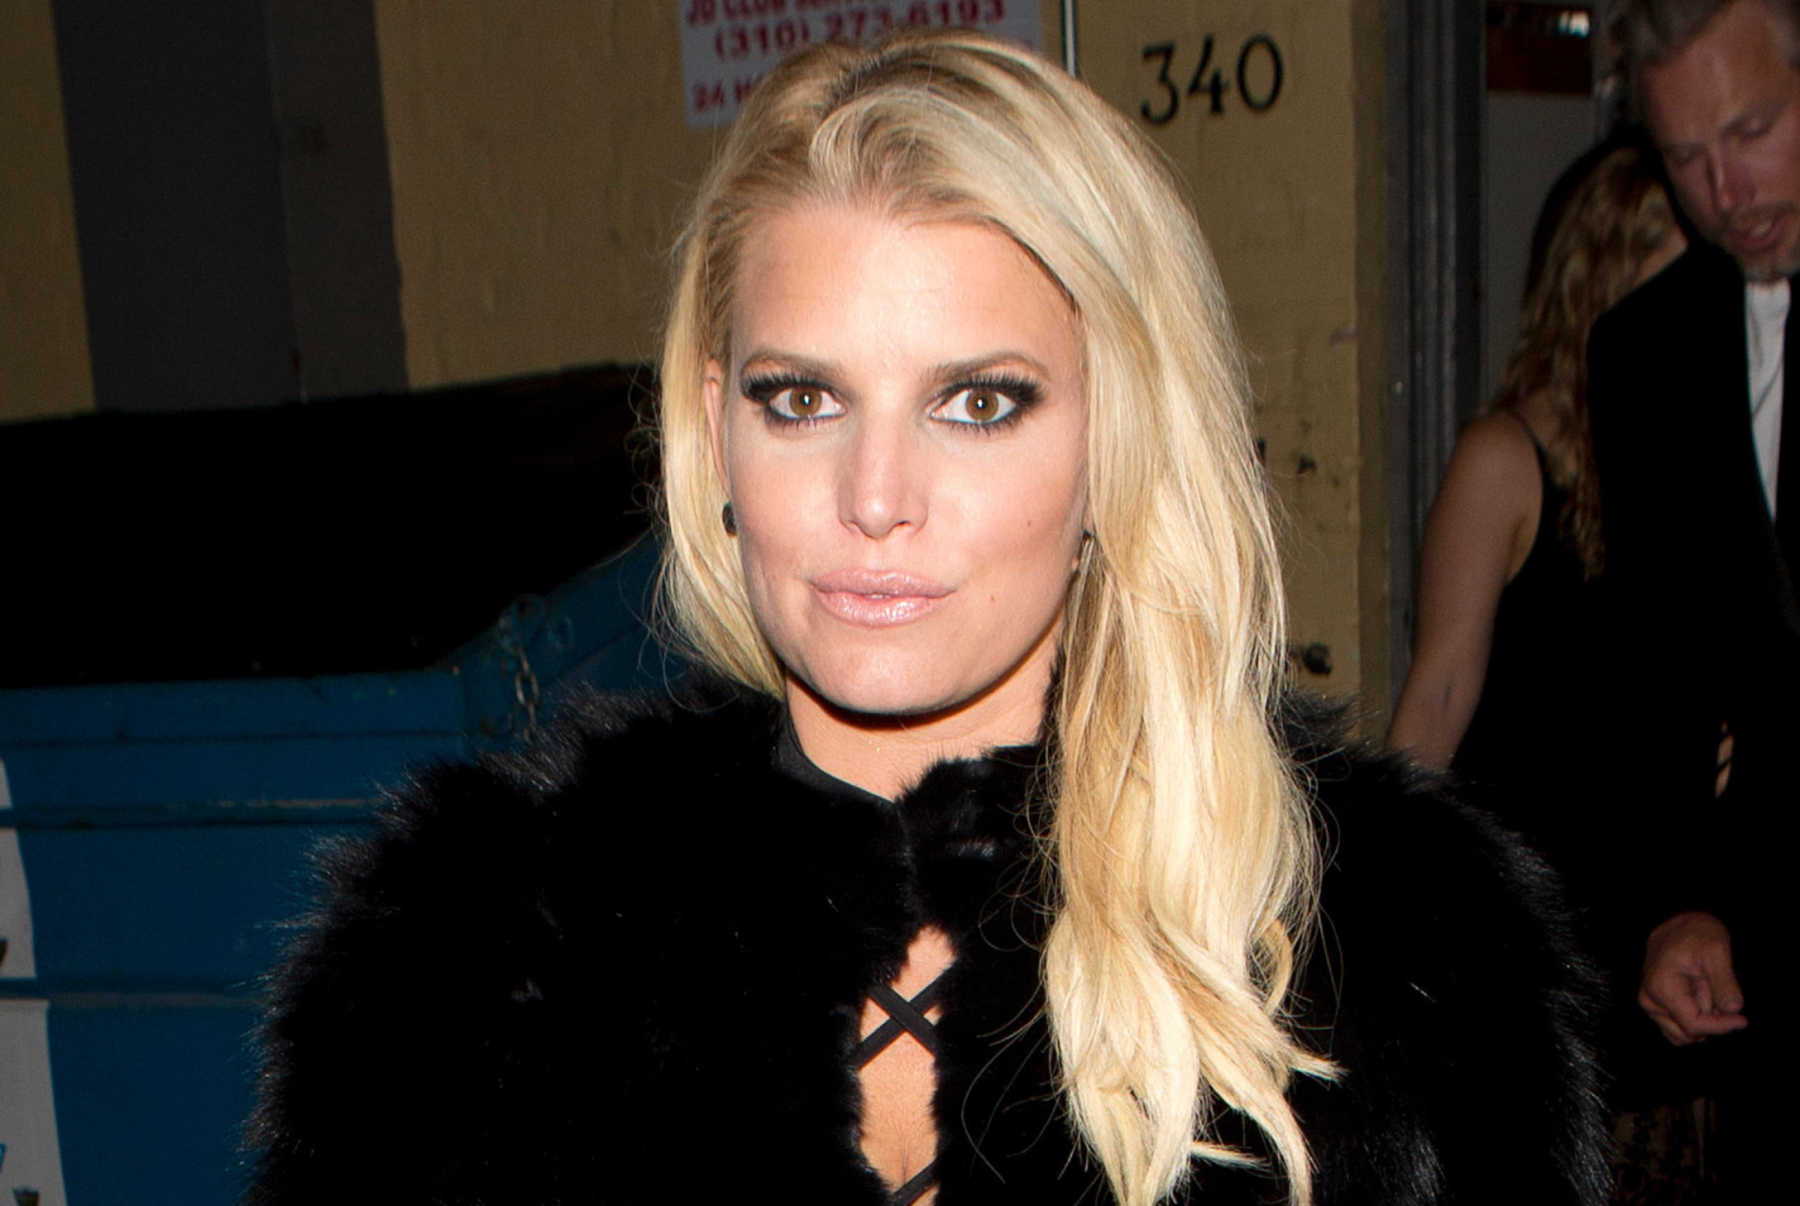 Jessica Simpson slammed for 'heavy filters' in new 'unrecognizable' pic  after sparking concern with 'very thin' frame